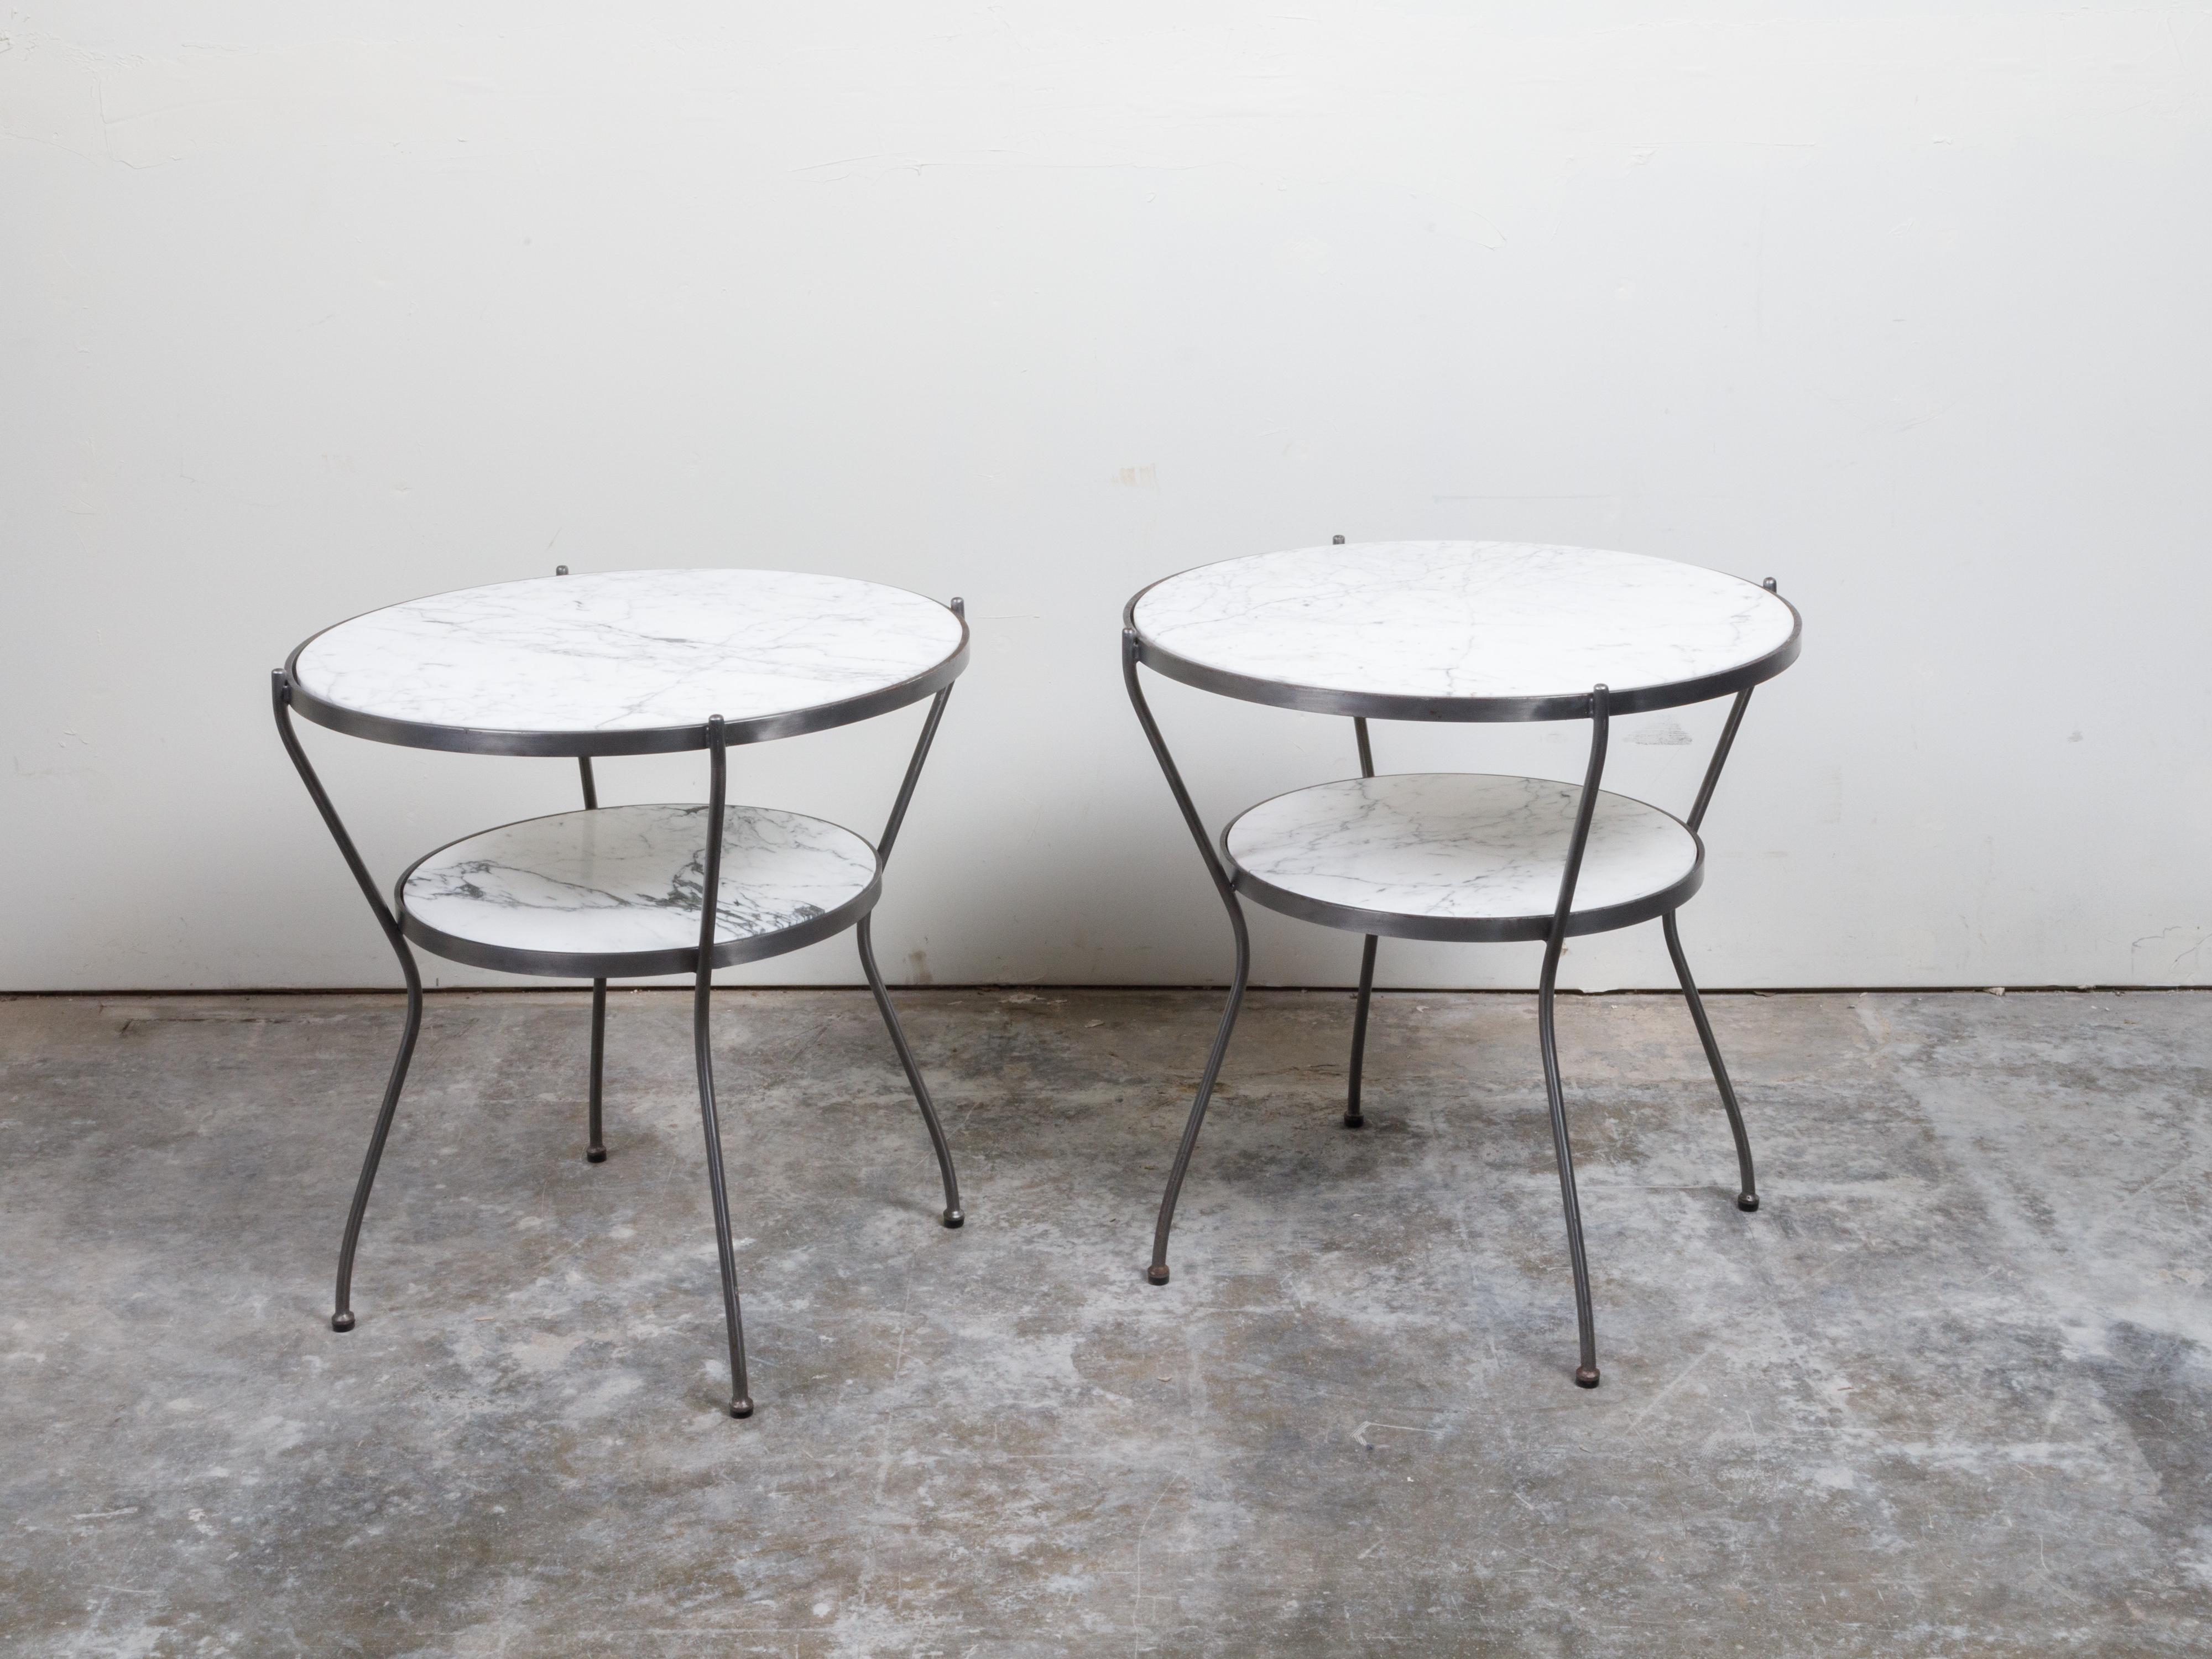 Pair of Italian Midcentury Steel Side Tables with Marble Tops and Shelves For Sale 5